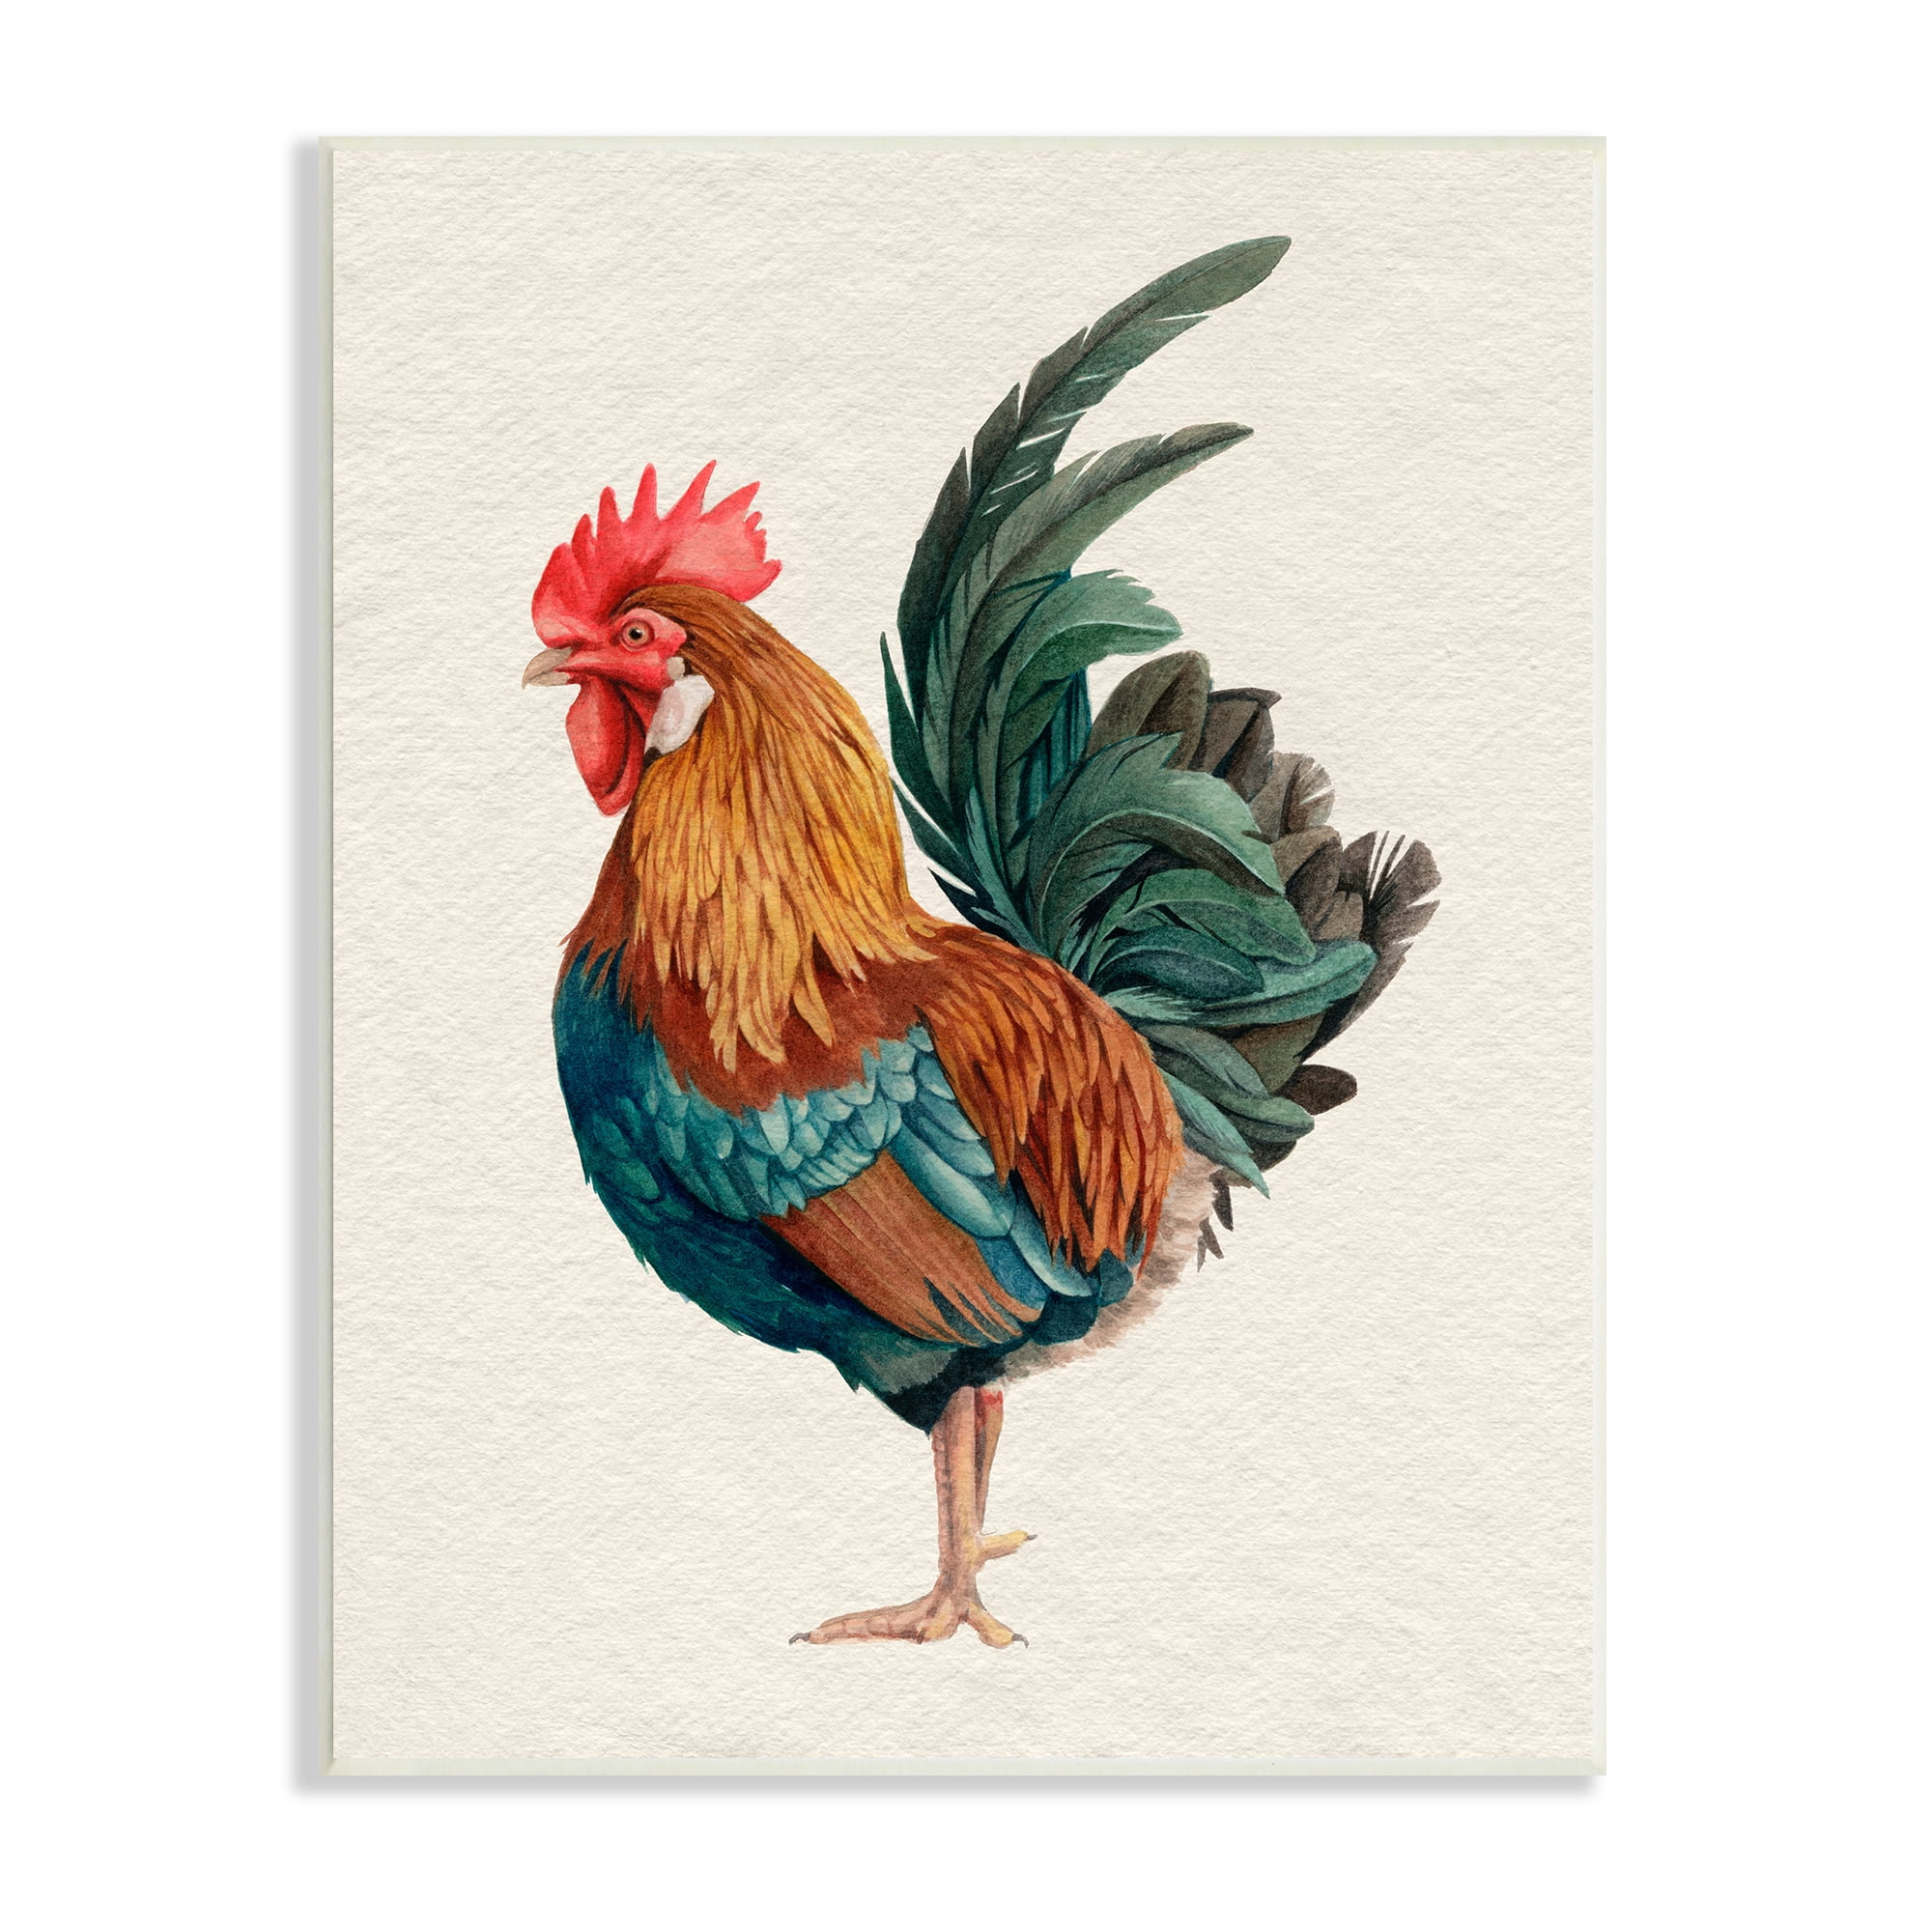 Details about   Rooster Picture Made on Wood Kitchen Wall Art Decor Ready to Hang. 